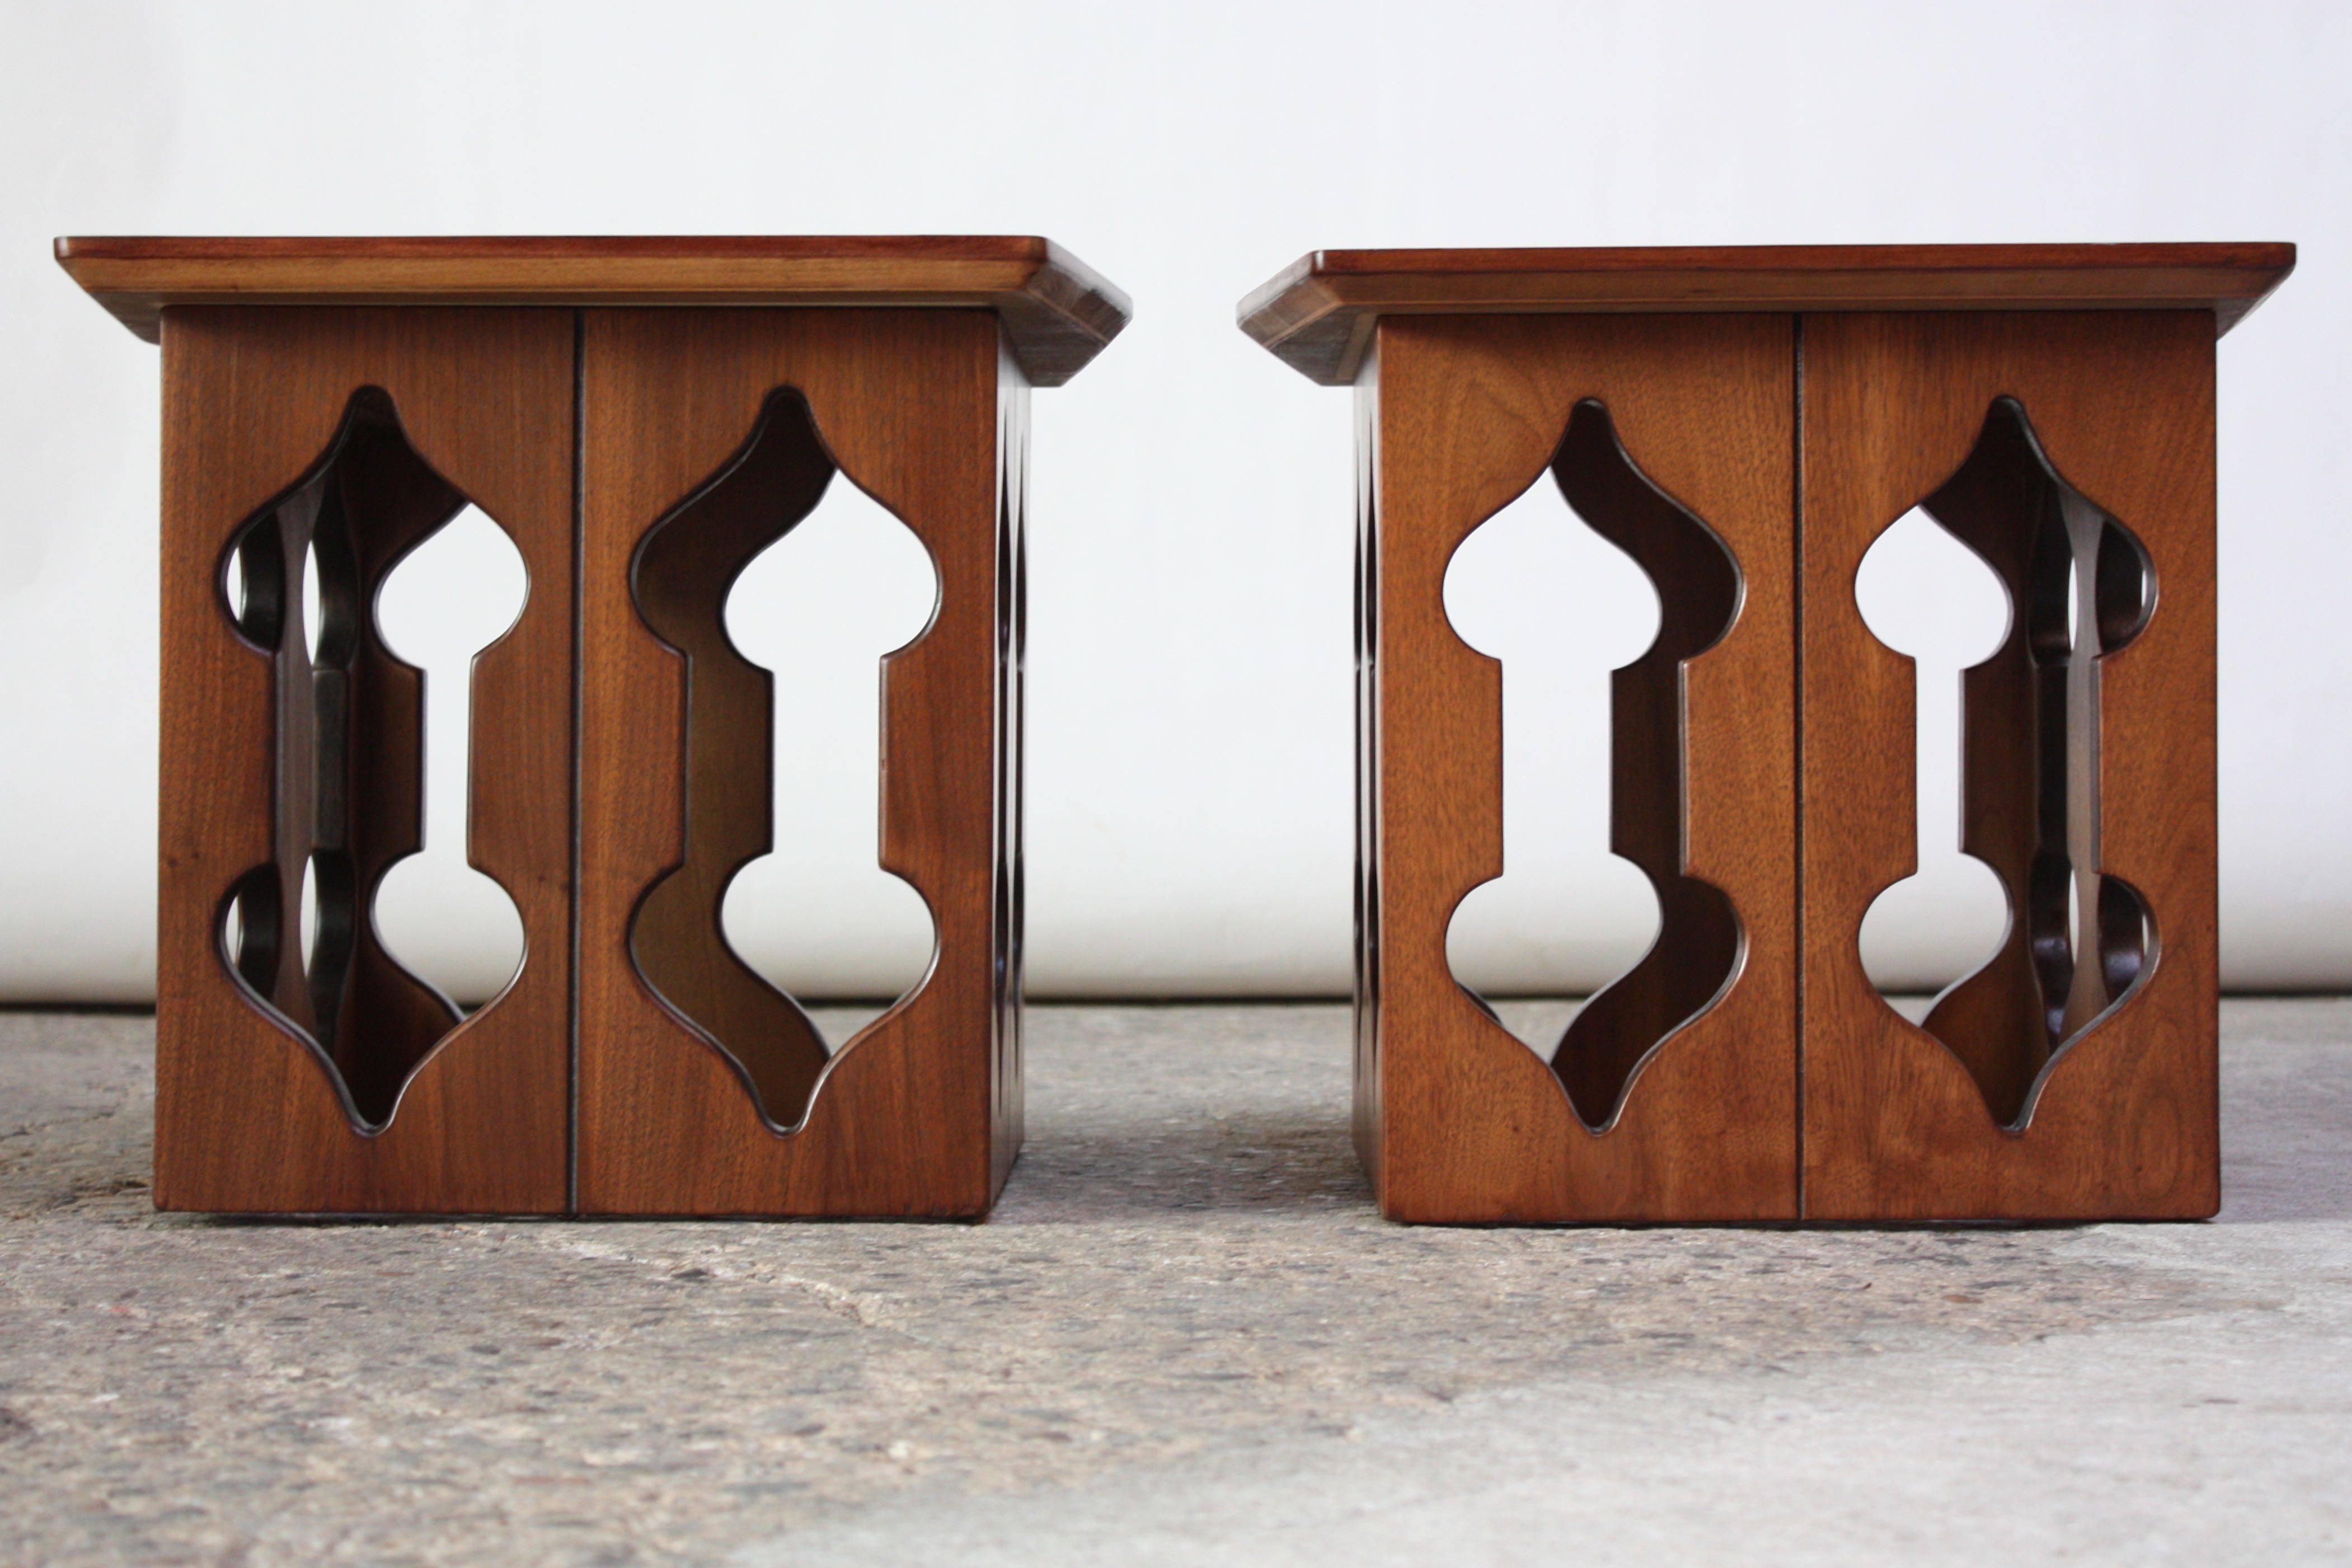 Pair of midcentury American modern walnut end or side tables with Moorish-style carved openings. Unique form and beautiful walnut grain. Newly refinished condition. Originally retailed at Barker Brothers in Los Angeles.